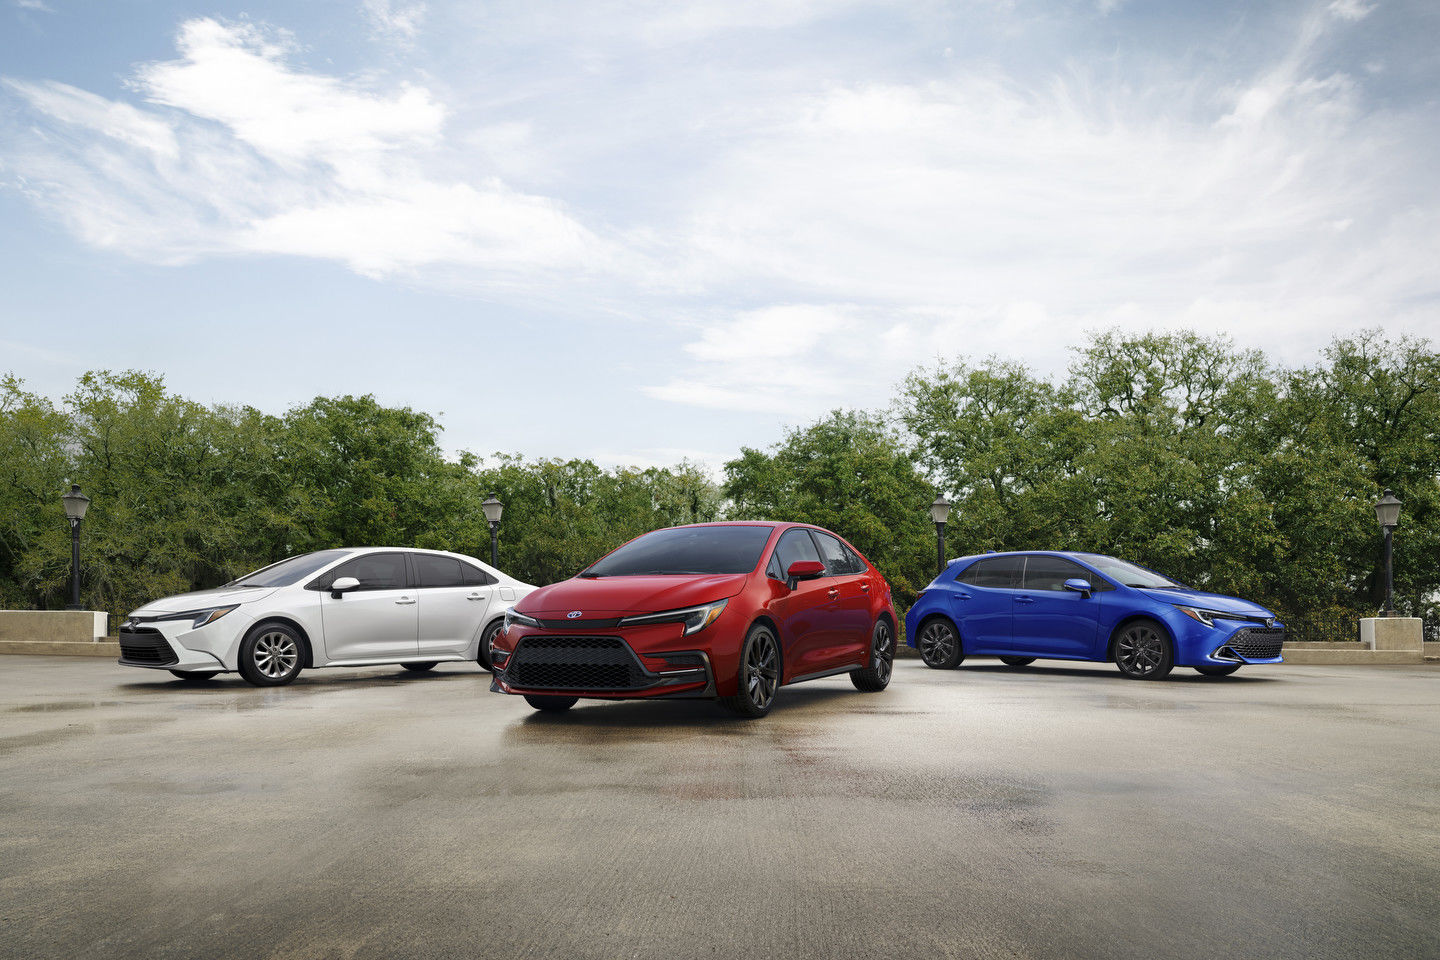 The 2023 Toyota Corolla offers significantly improved features and performance